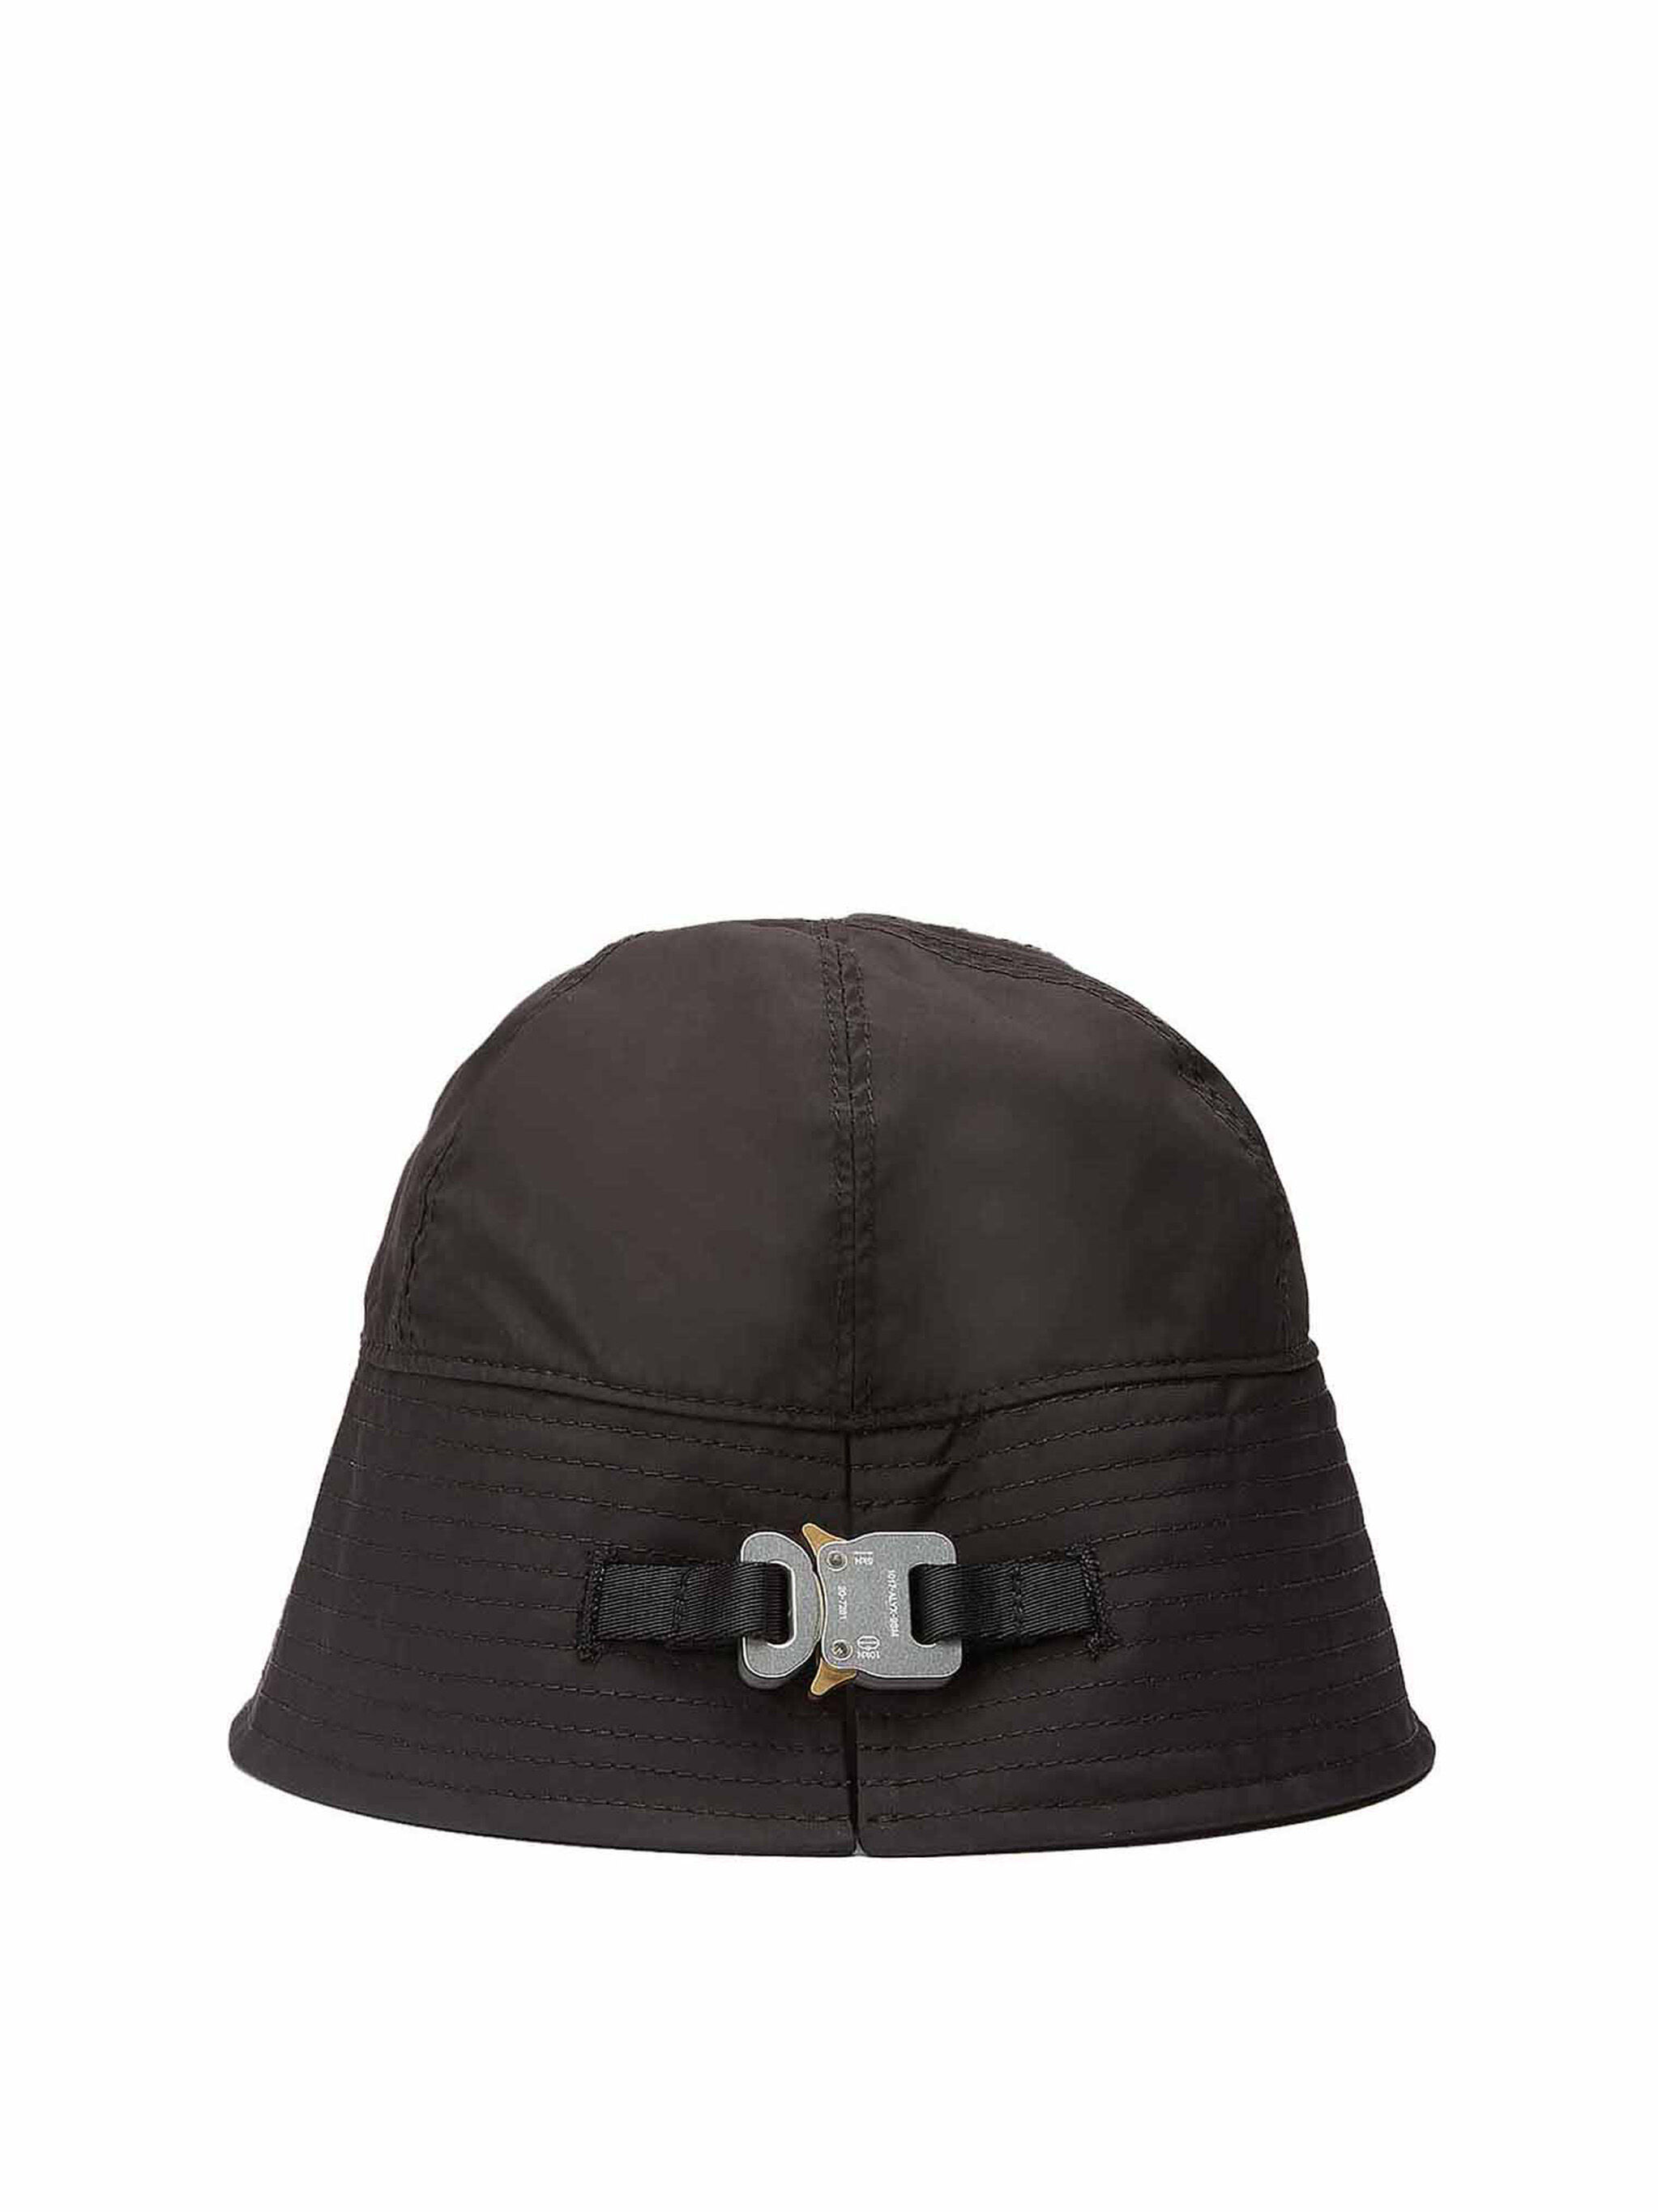 1017 ALYX 9SM Bucket Hat with Rollercoaster Buckle | THE FLAMEL®